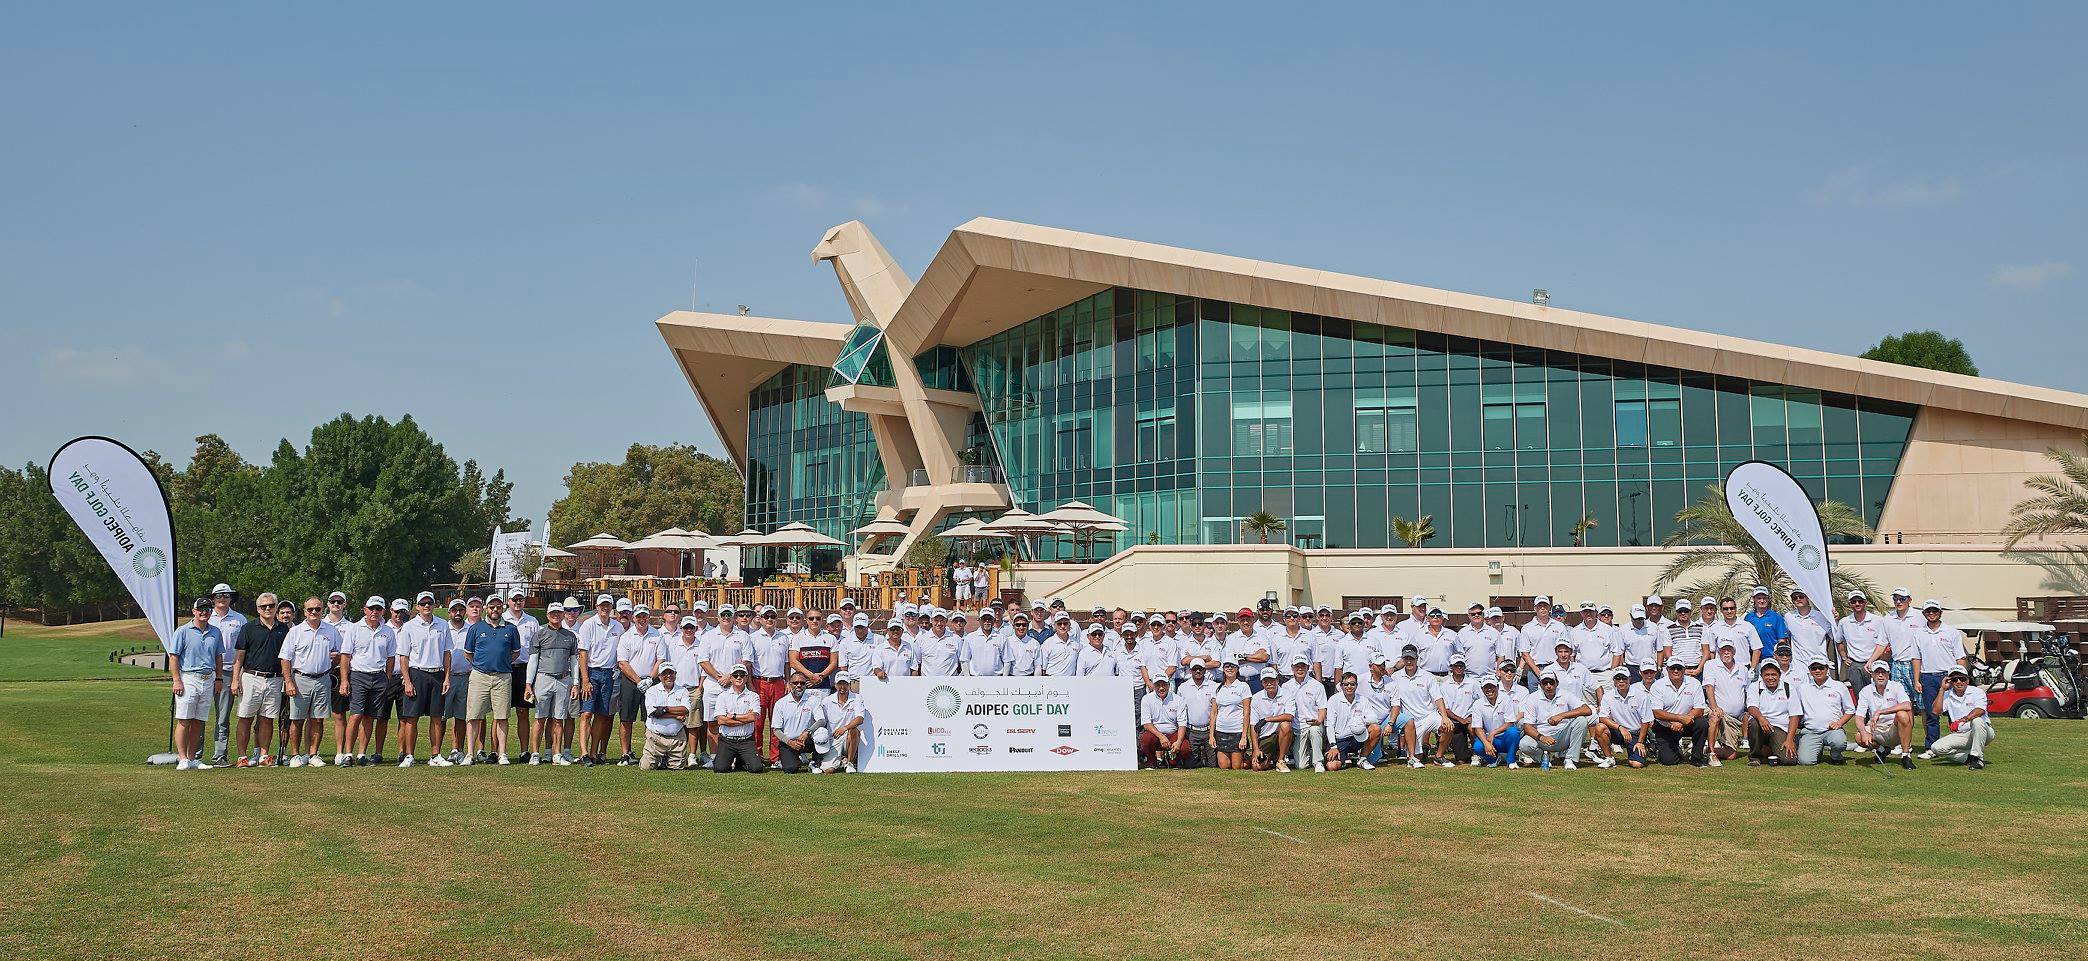 ADIPEC Golf Day 2017 Headhunting Specialists in the Oil & Gas Industry